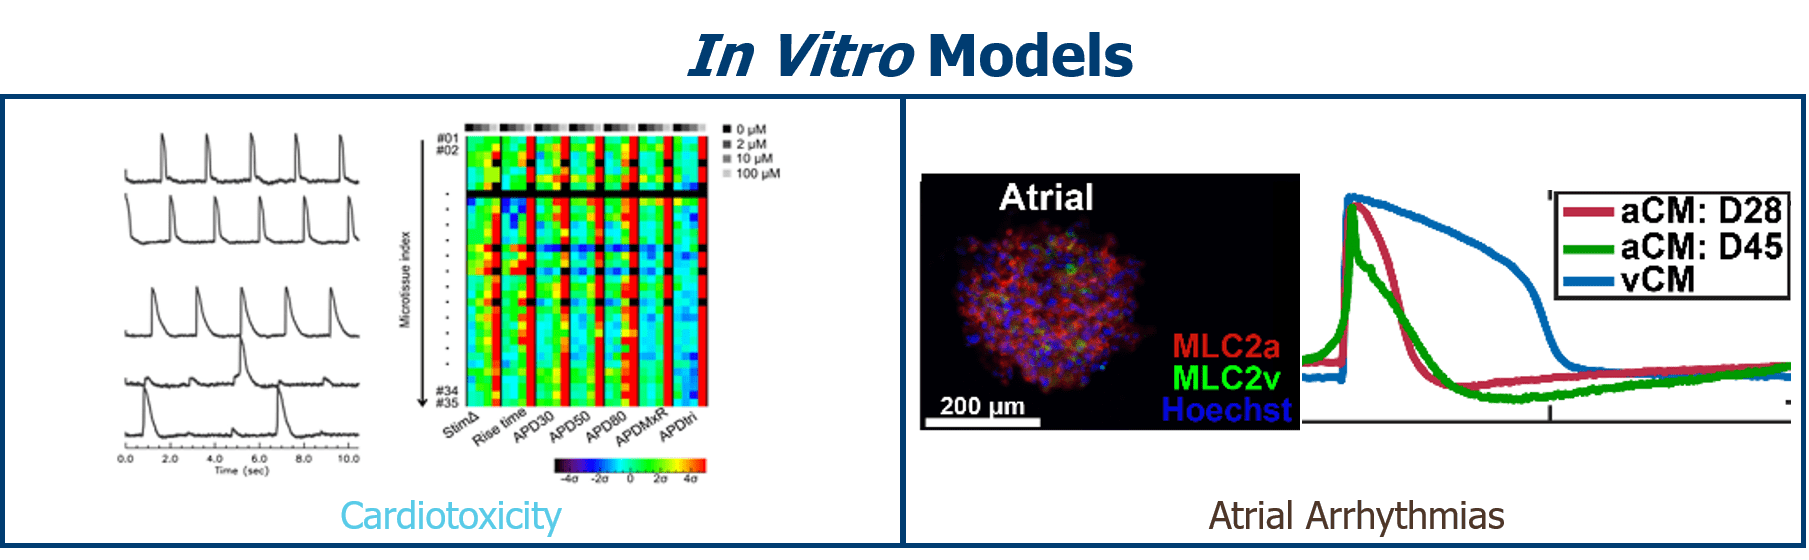 in vitro models research images